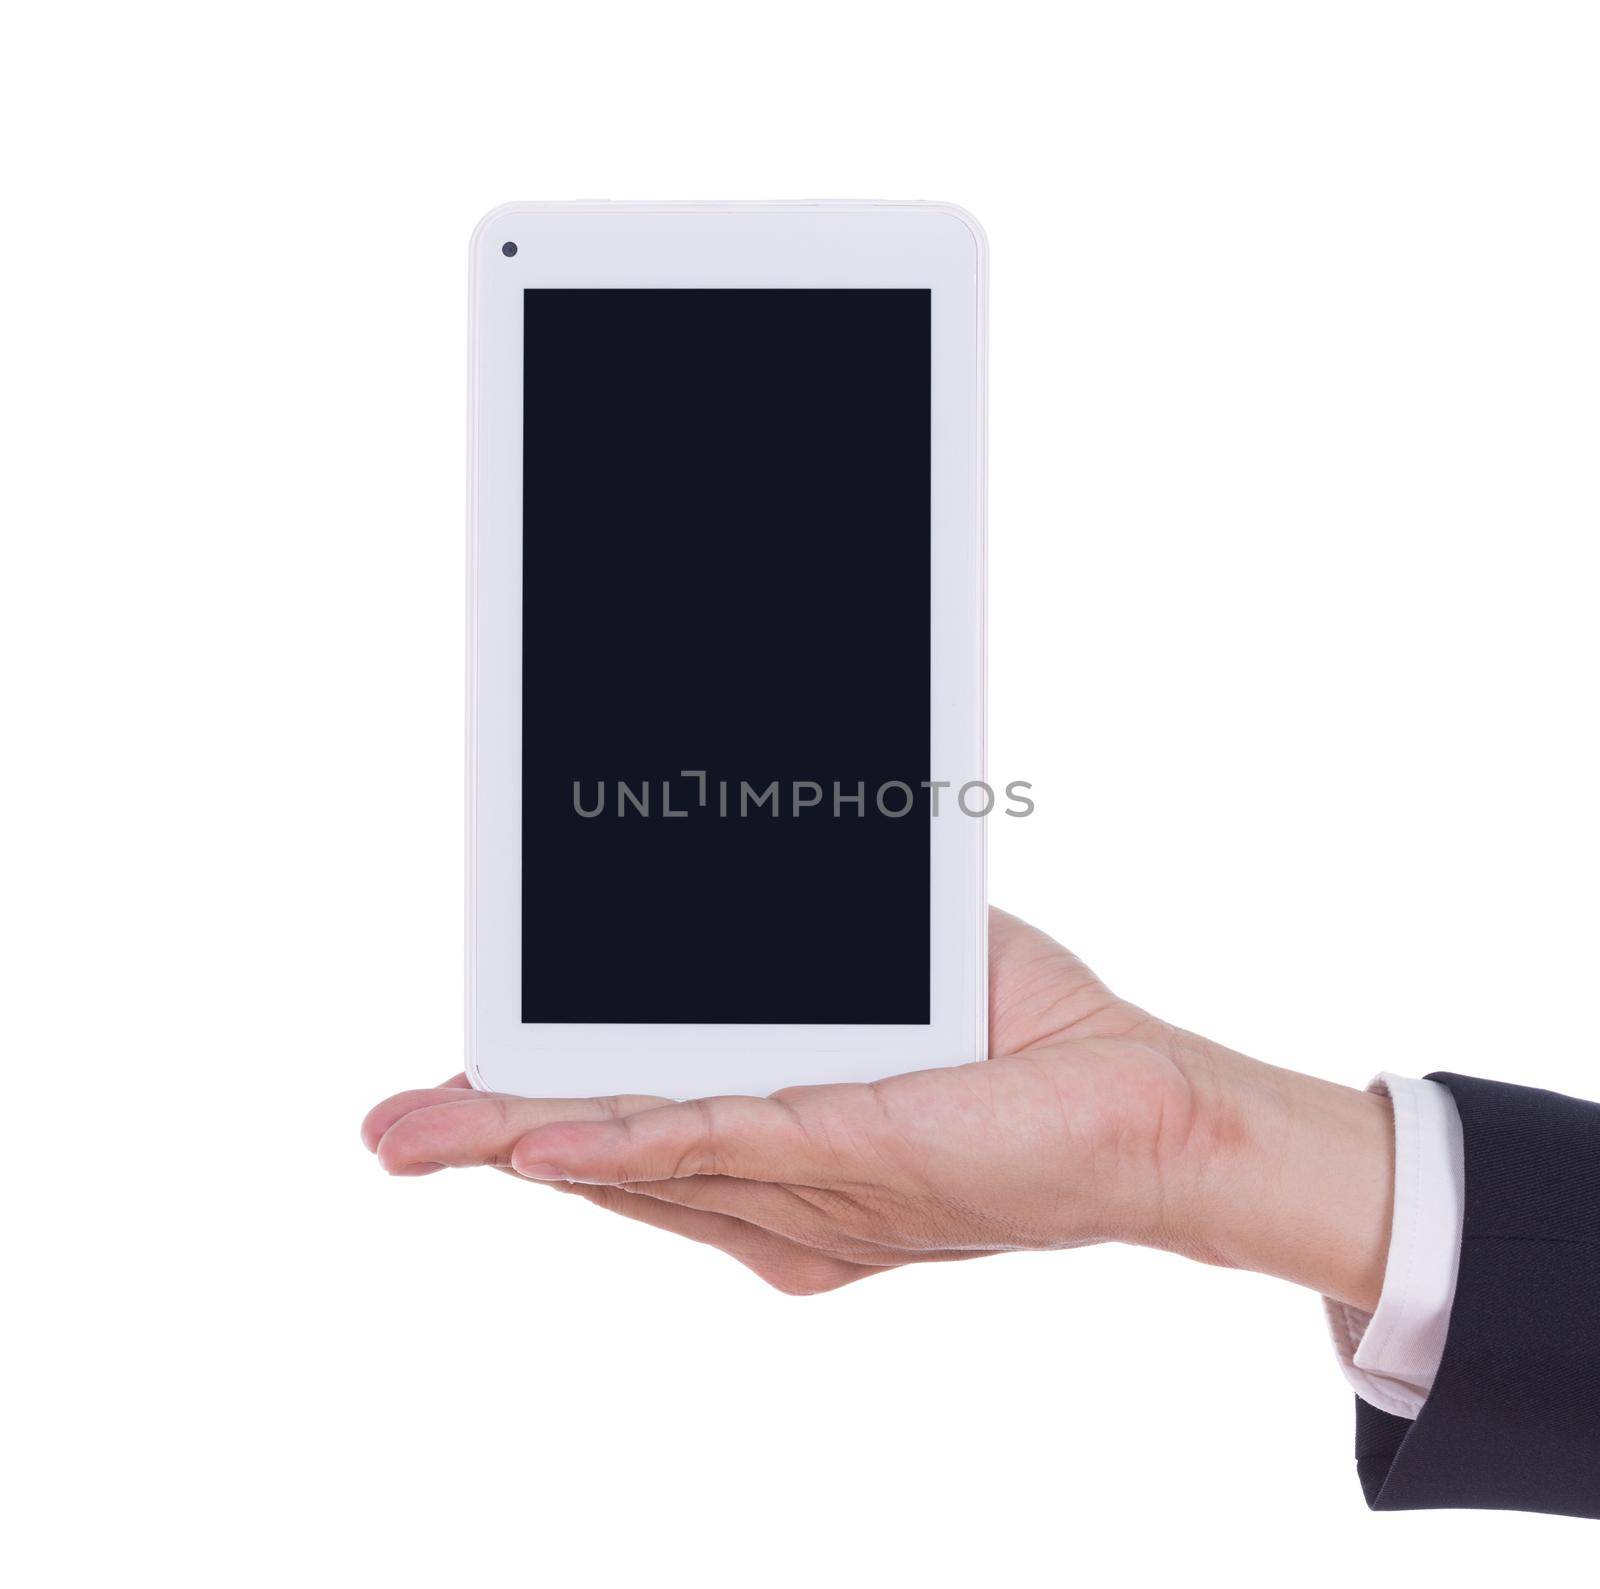 business hand holding a small tablet touch computer isolated on white background